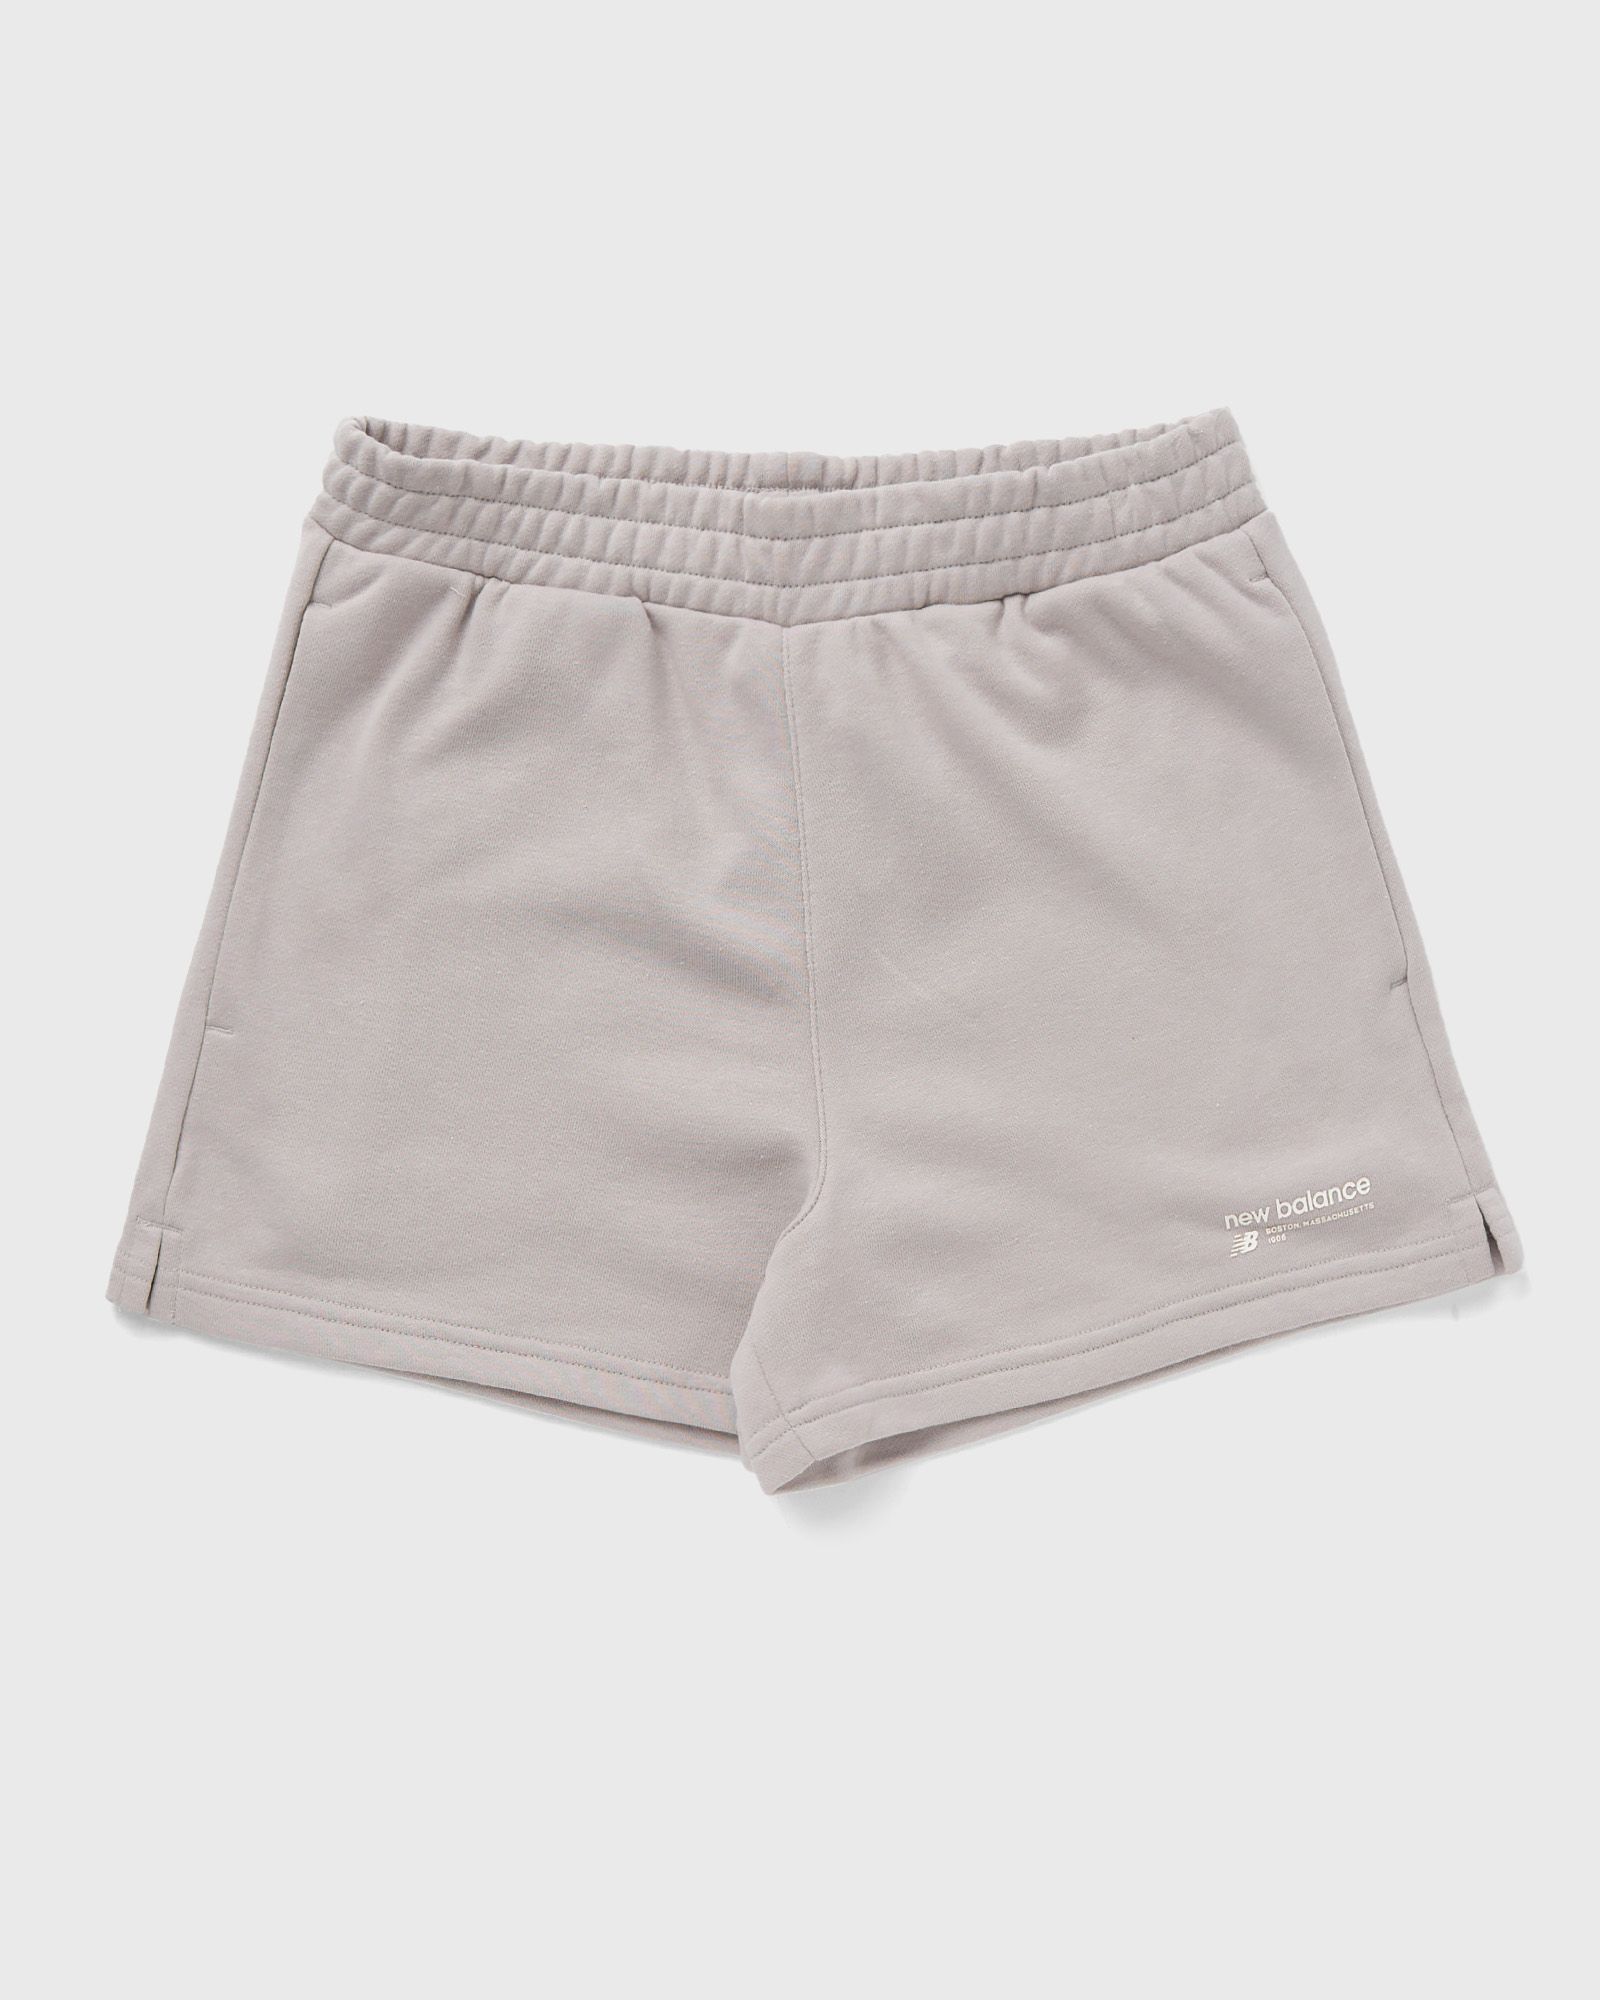 New Balance - linear heritage french terry short women casual shorts grey in größe:xs